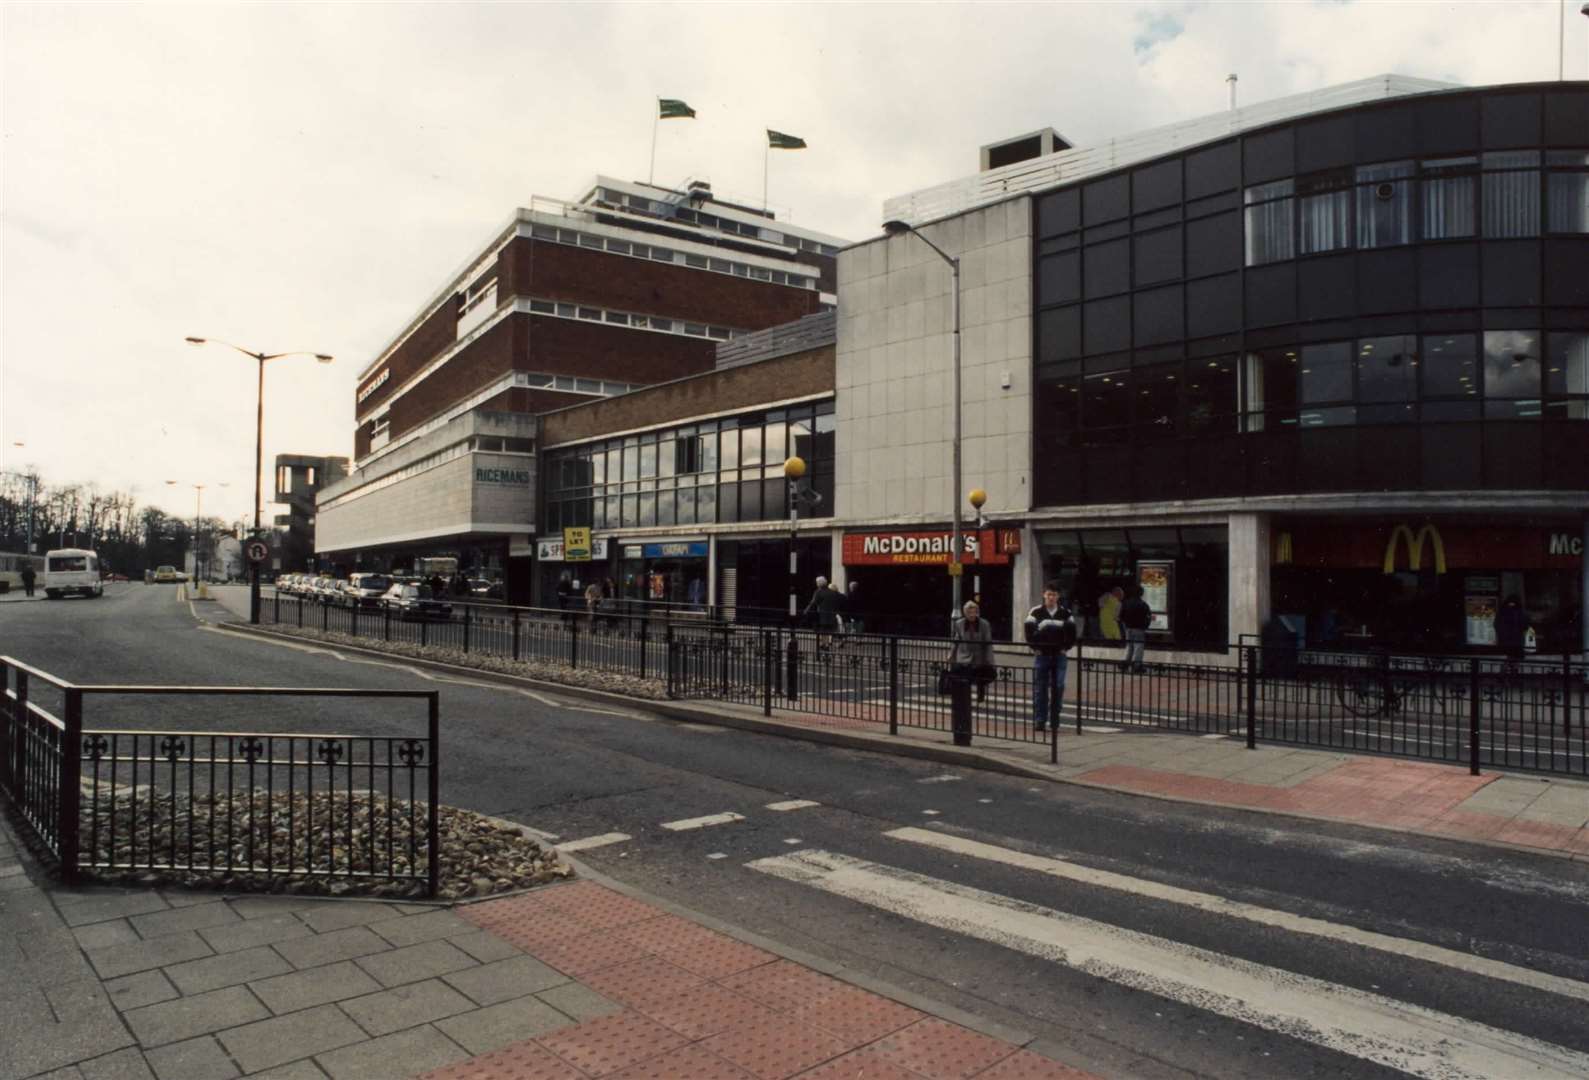 Ricemans department store and the old McDonald's in Canterbury in 1995